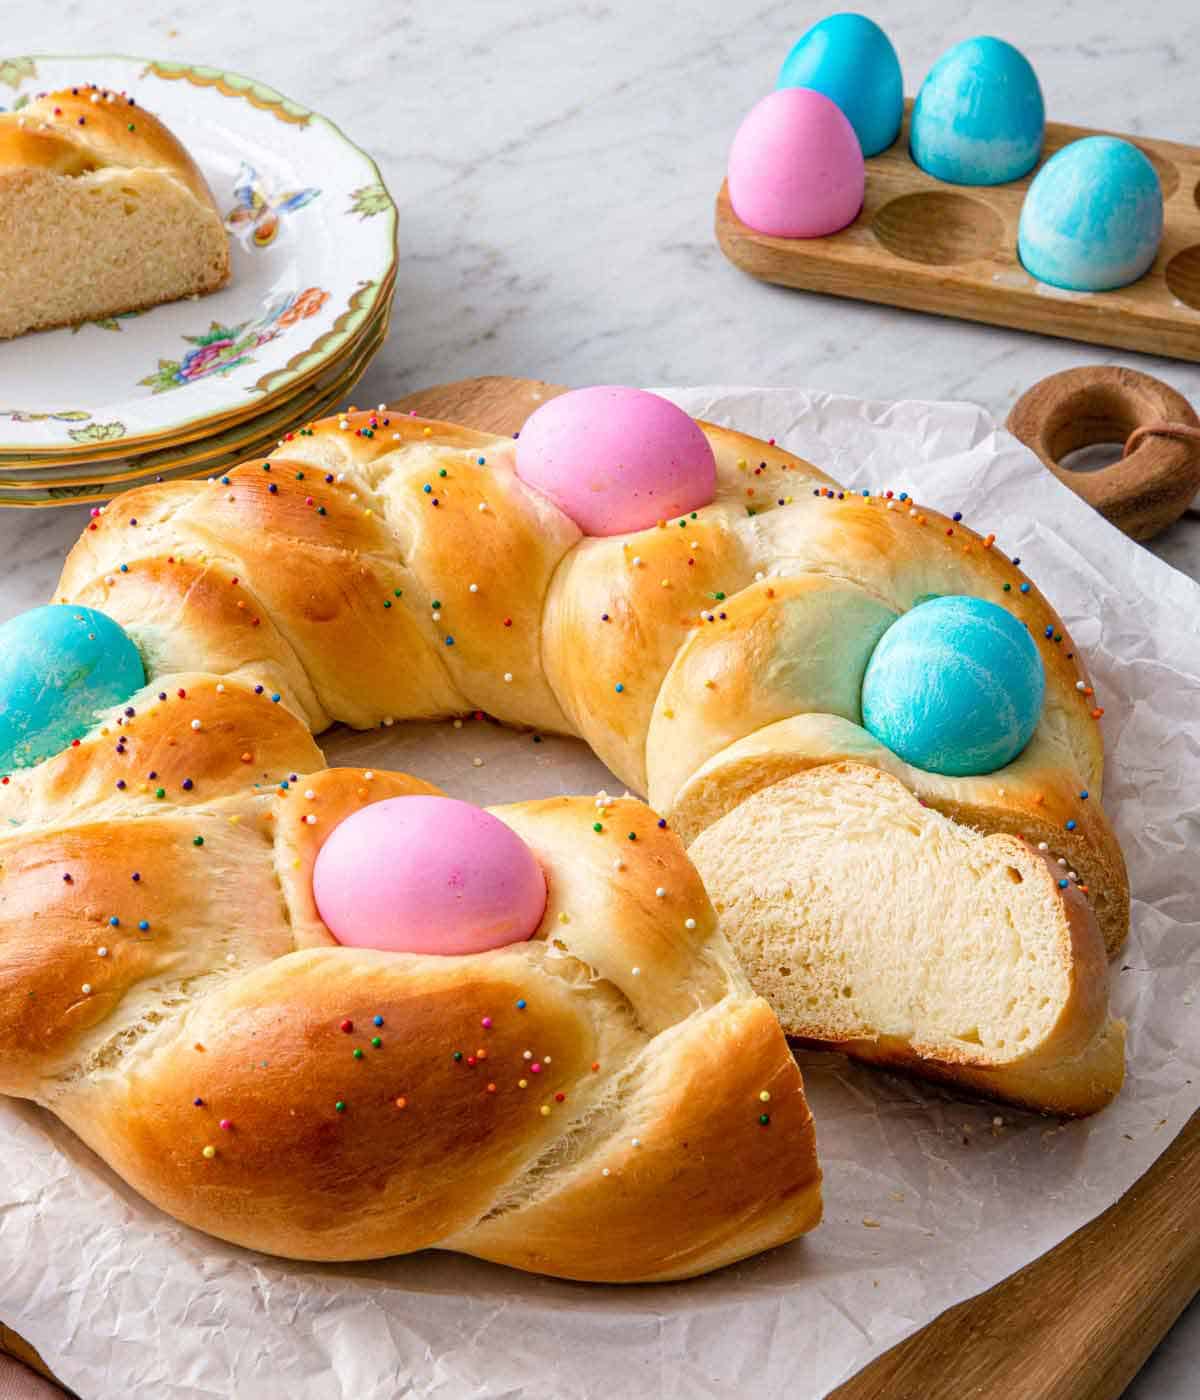 Easter bread with a slice cut and angled to show the inside crumb.